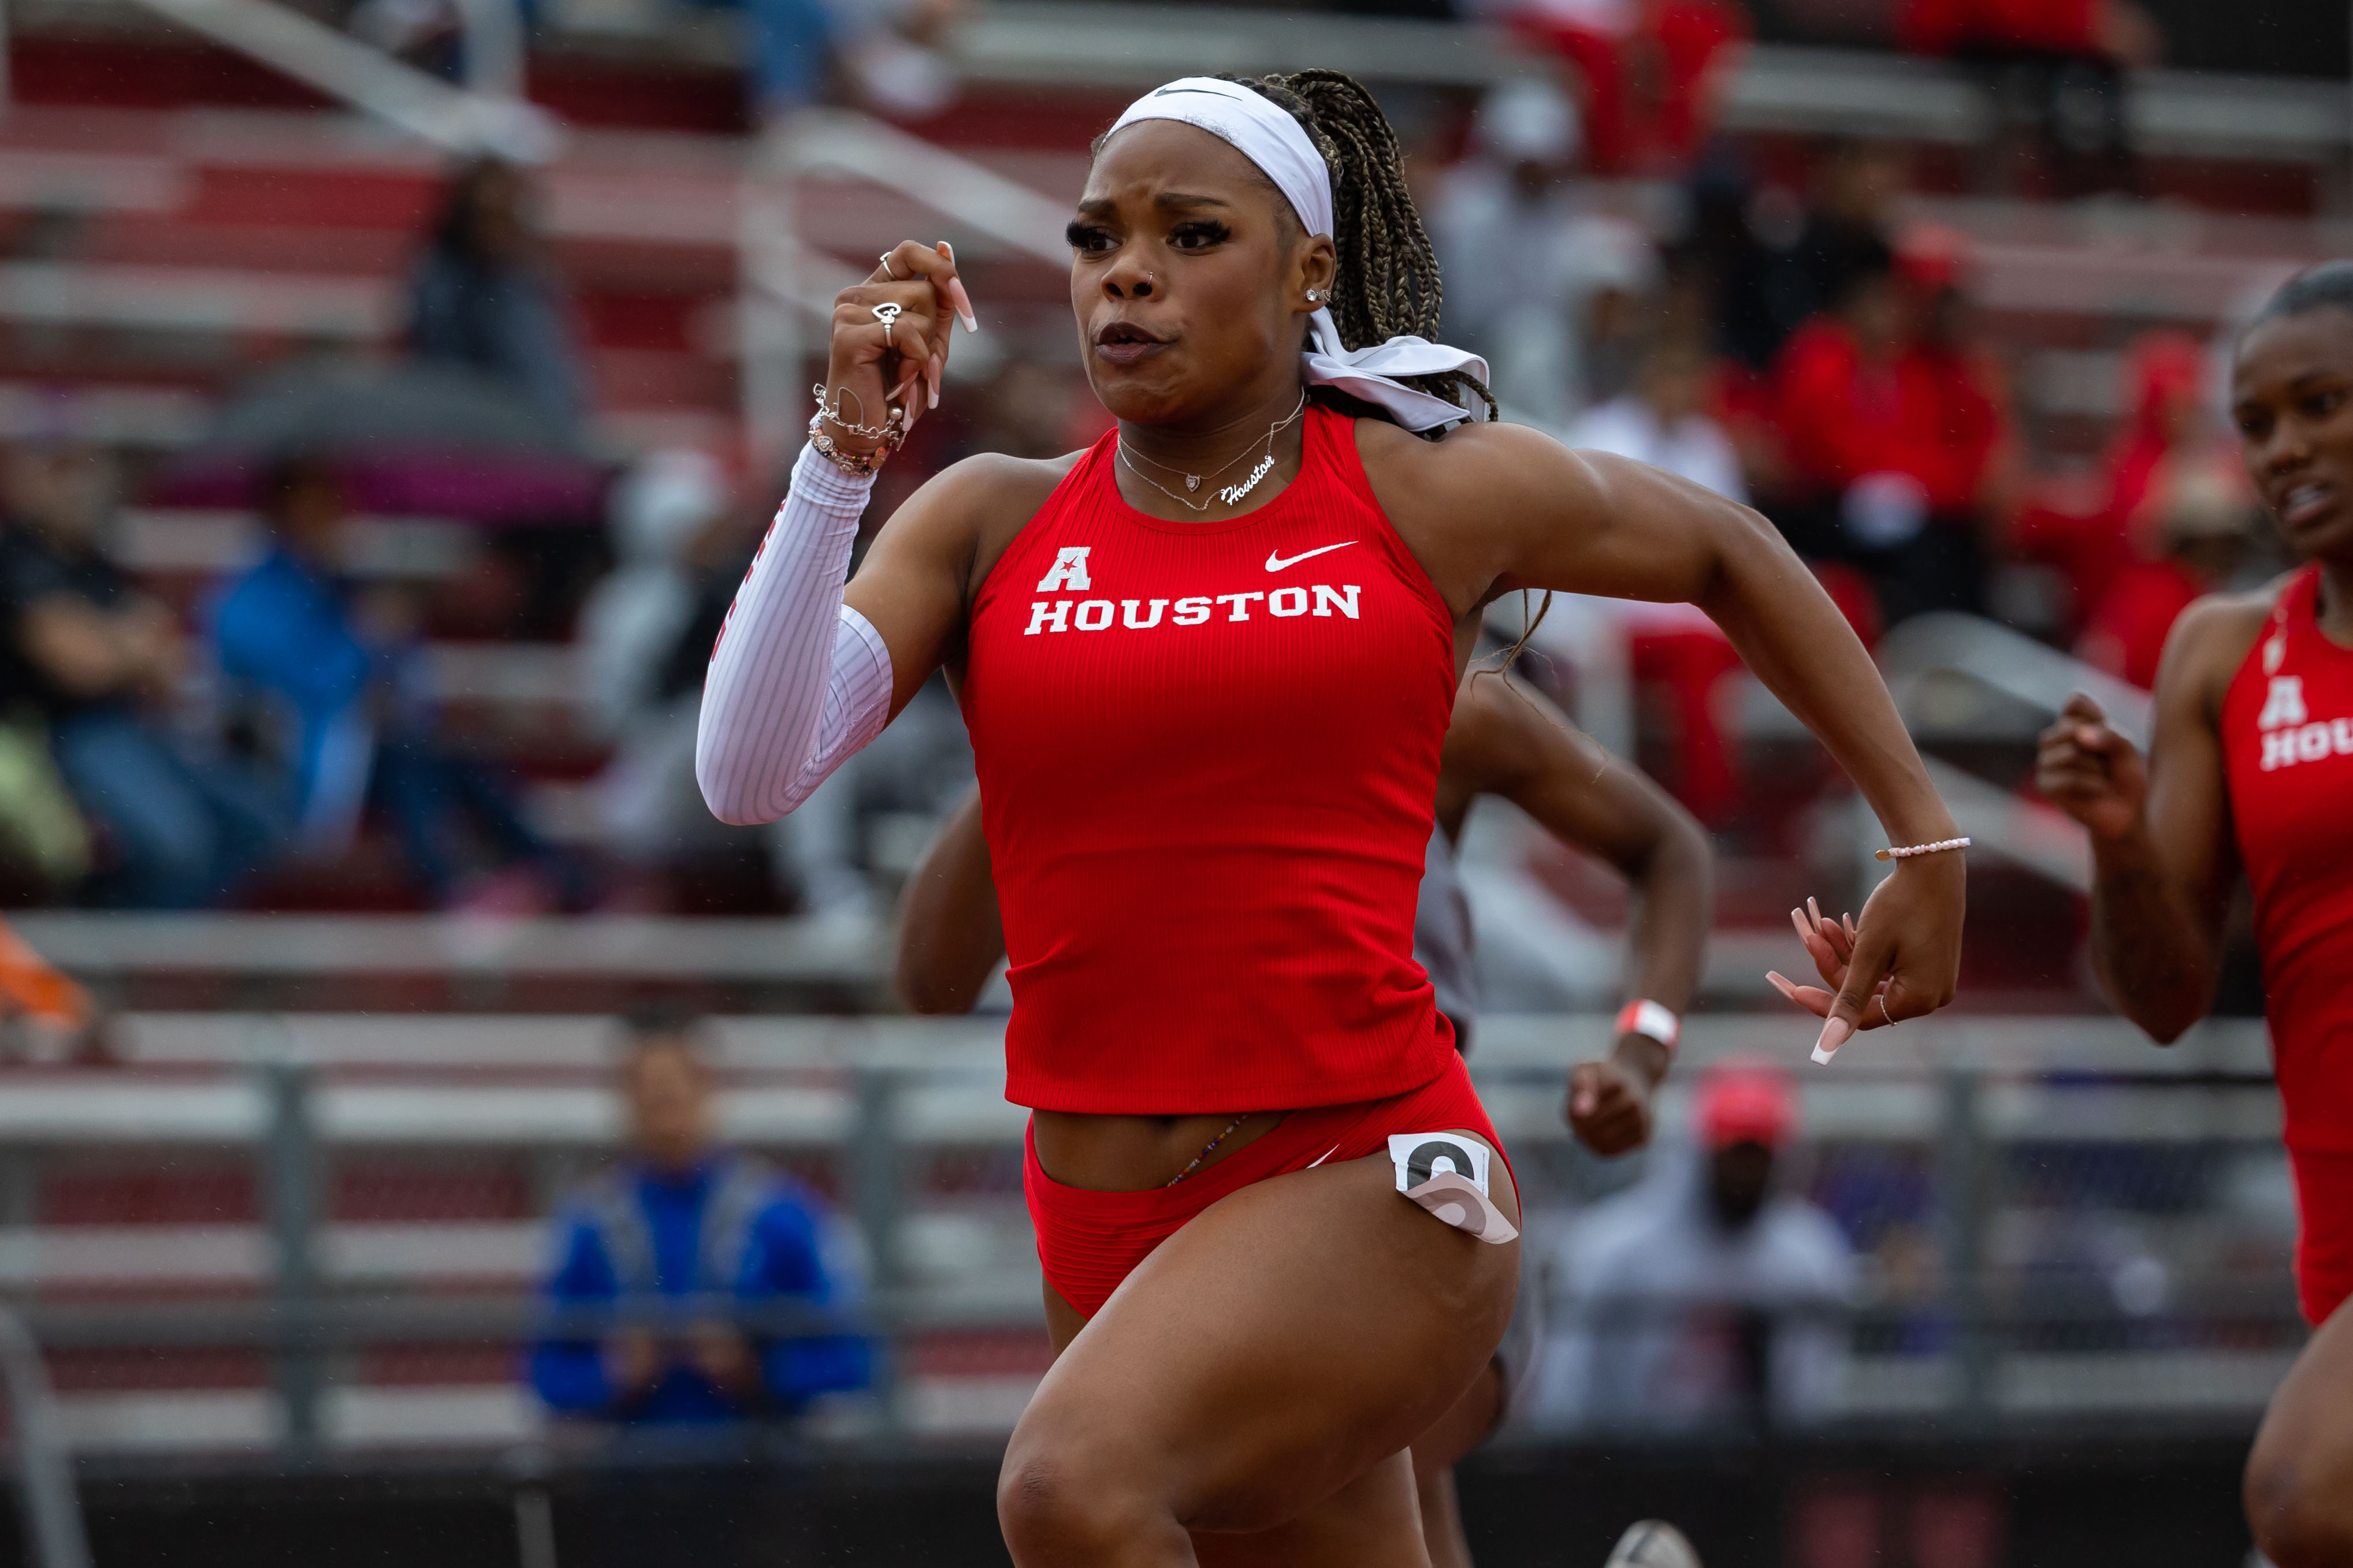 UH track and field wins six events at Victor Lopez Classic The Cougar